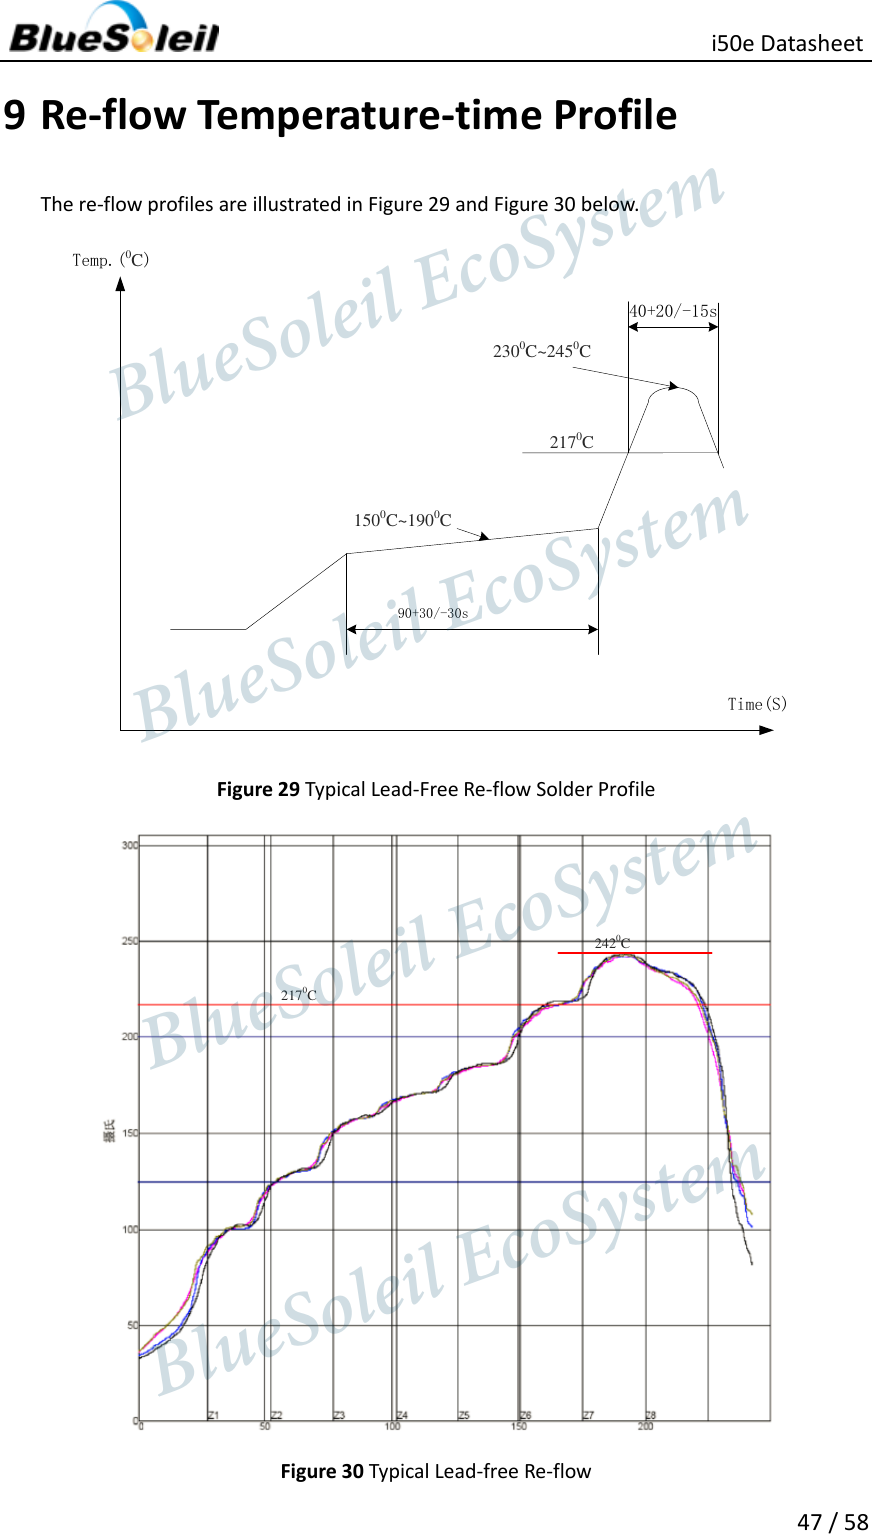                                                   i50e Datasheet 47 / 58 9 Re-flow Temperature-time Profile The re-flow profiles are illustrated in Figure 29 and Figure 30 below. 40+20/-15s2170C90+30/-30s2300C~2450C1500C~1900CTemp.(0C)Time(S) Figure 29 Typical Lead-Free Re-flow Solder Profile 2170C2420C Figure 30 Typical Lead-free Re-flow                  BlueSoleil EcoSystem            BlueSoleil EcoSystem      BlueSoleil EcoSystemBlueSoleil EcoSystem